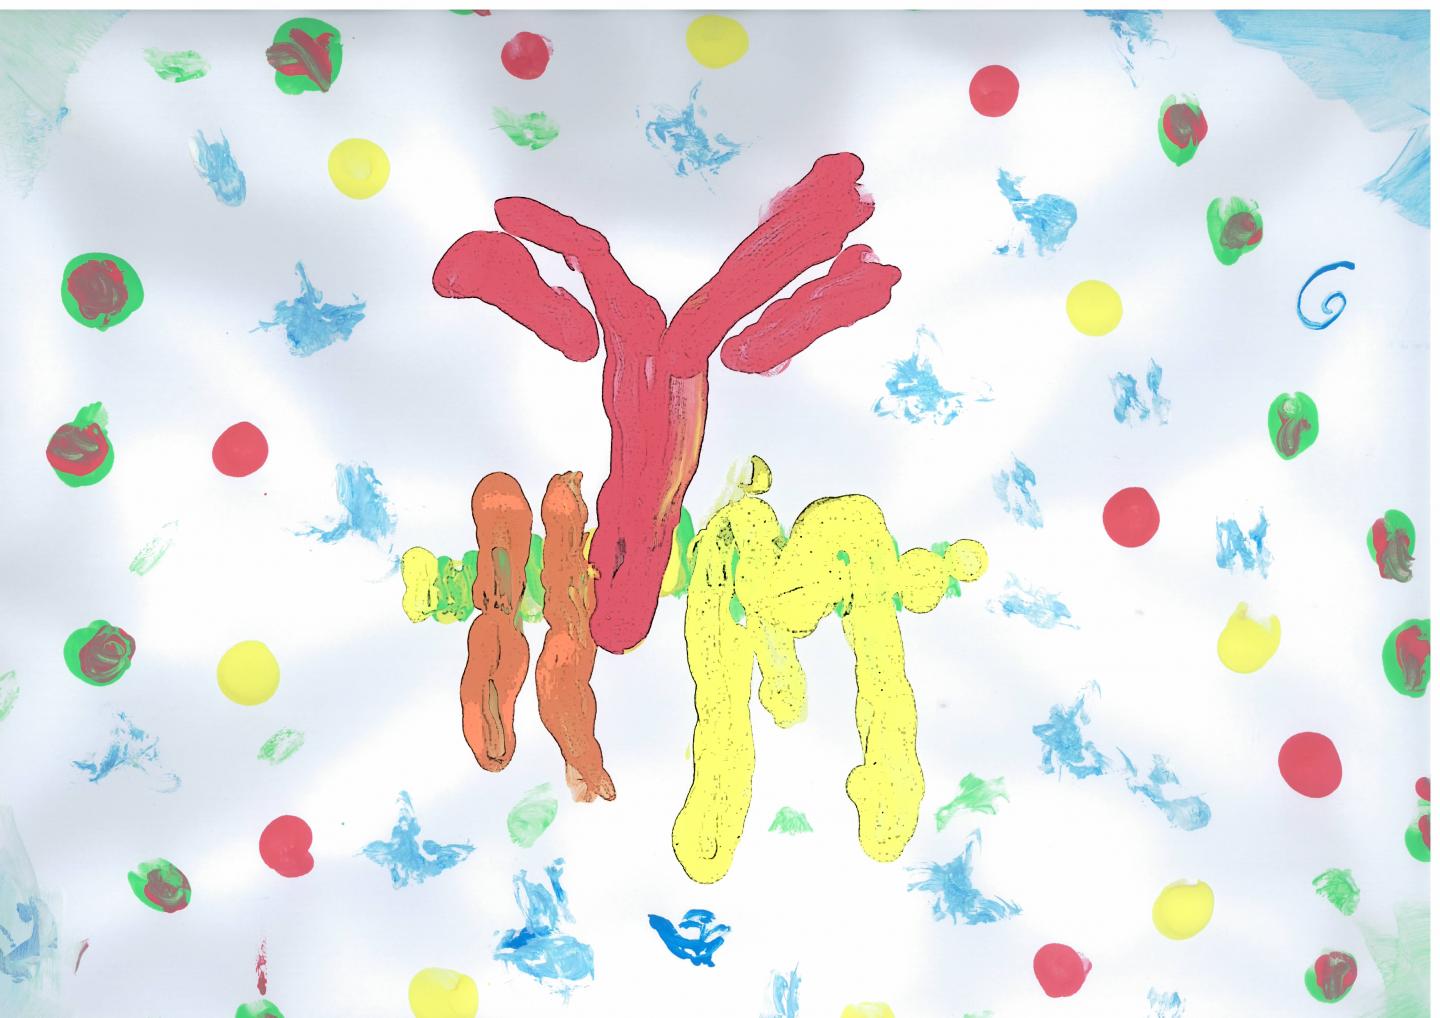 This is artwork painted by the daughter of researcher Susana Minguet. The protein Kidins220 (yellow) interacts with the B cell receptor (red and orange). [Susana Minguet, researcher at the University of Freiburg]